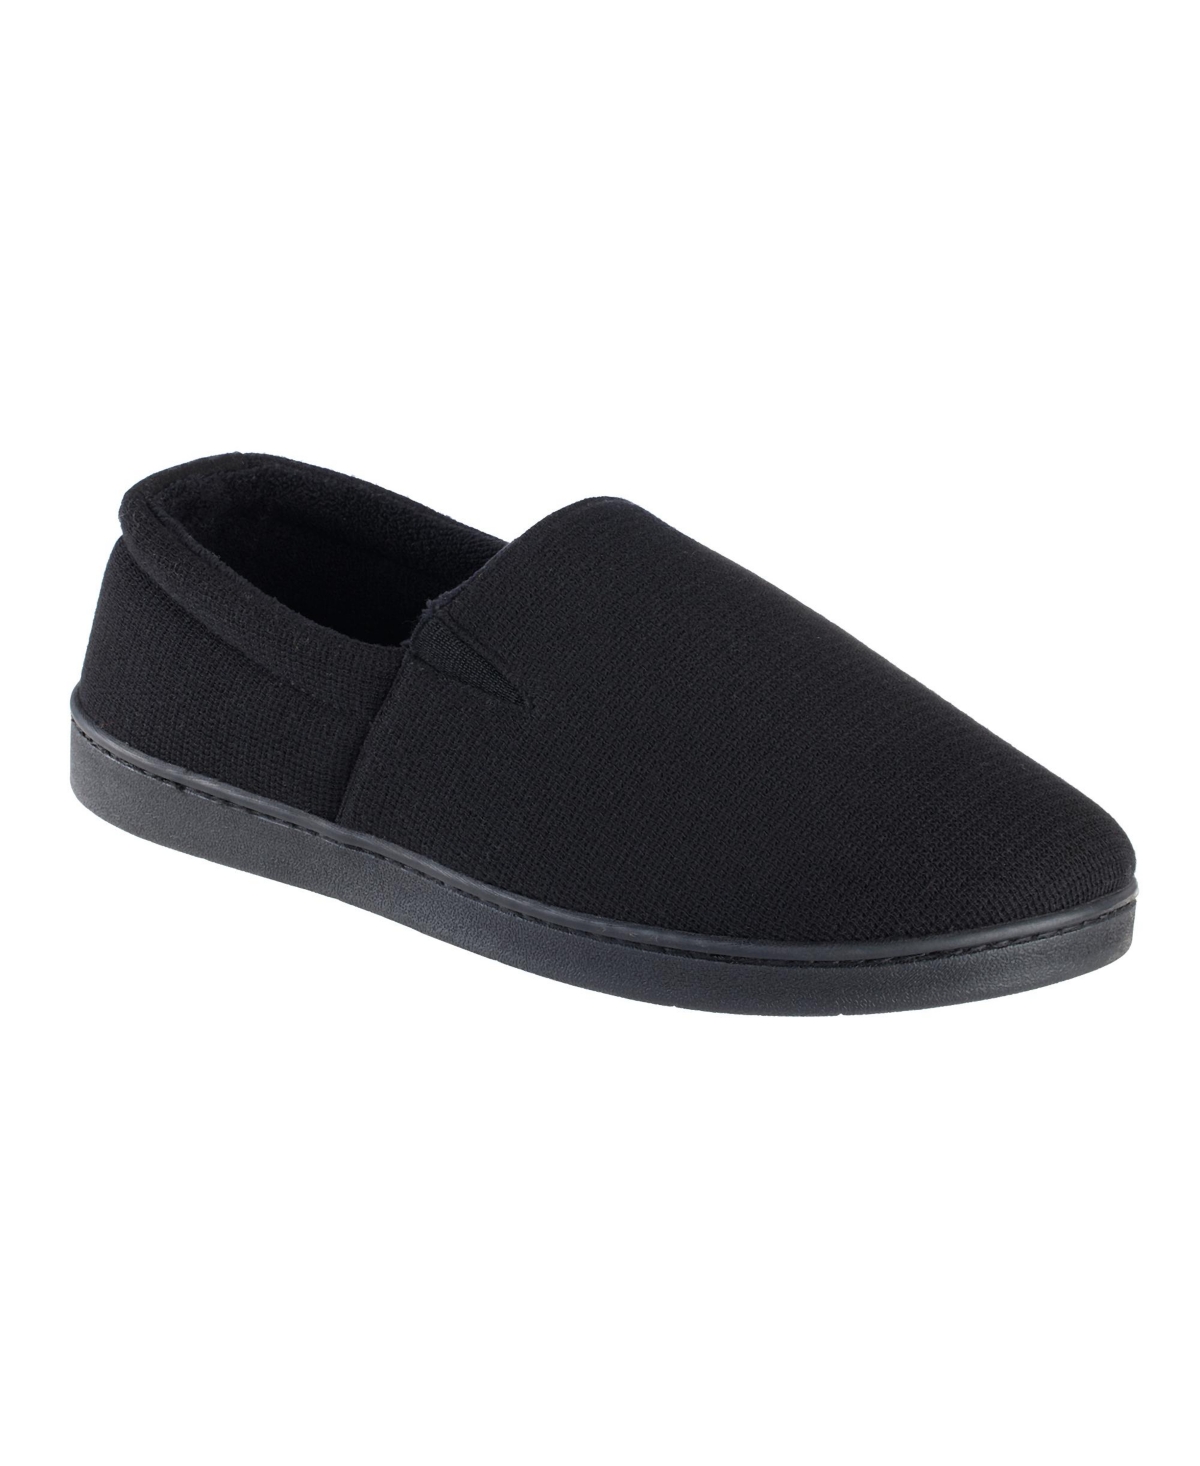 Men's Textured Knit Kai Closed Back Slippers with Gel-Infused Memory Foam - Dark Charcoal Heather